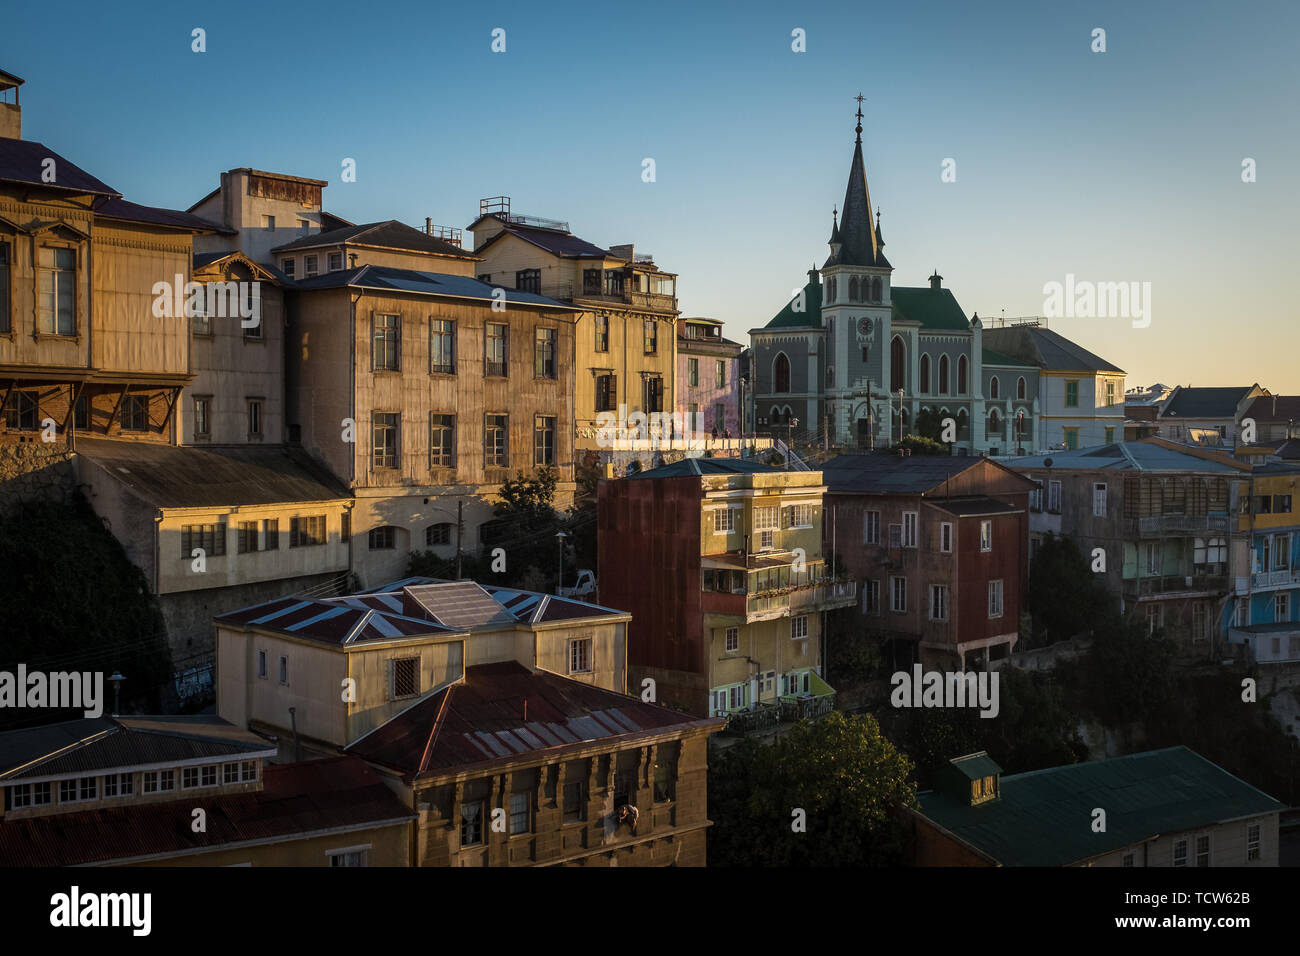 A sweeping view of the colourful streets of the city of Valparaiso, Chile at sunset Stock Photo